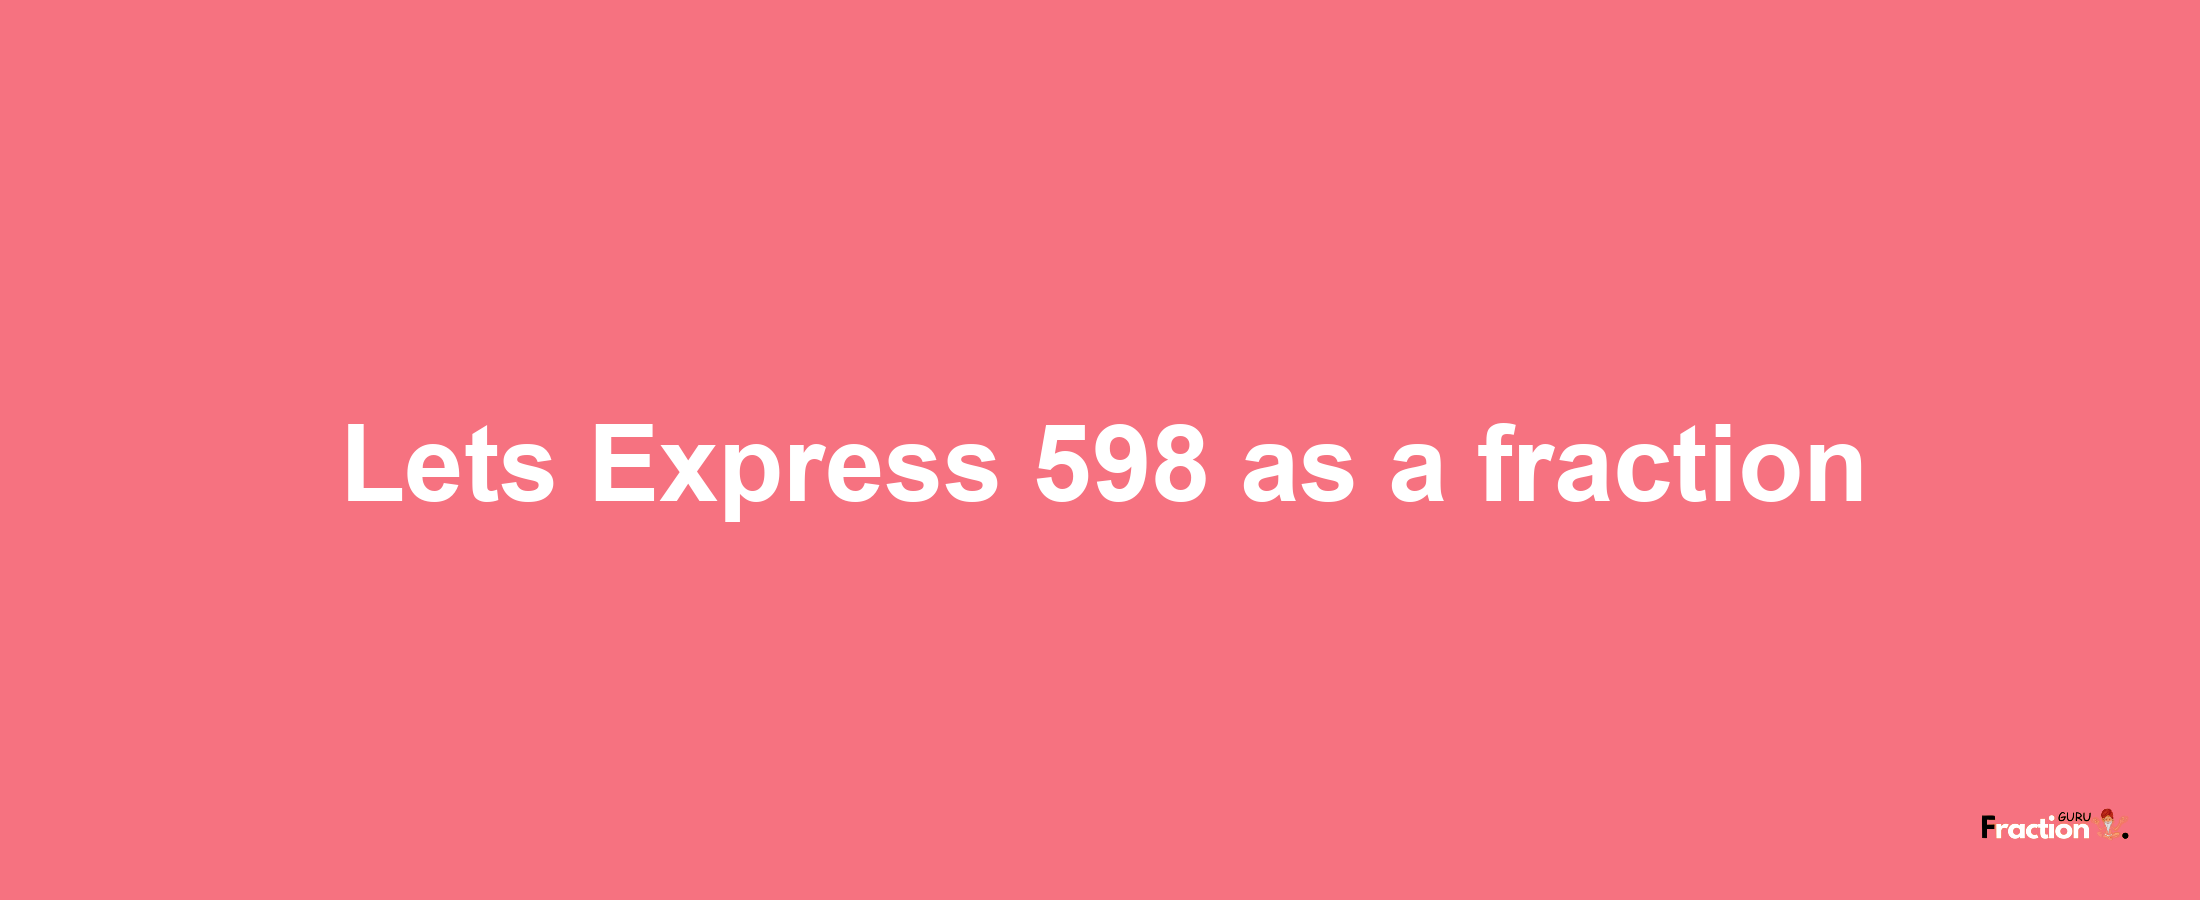 Lets Express 598 as afraction